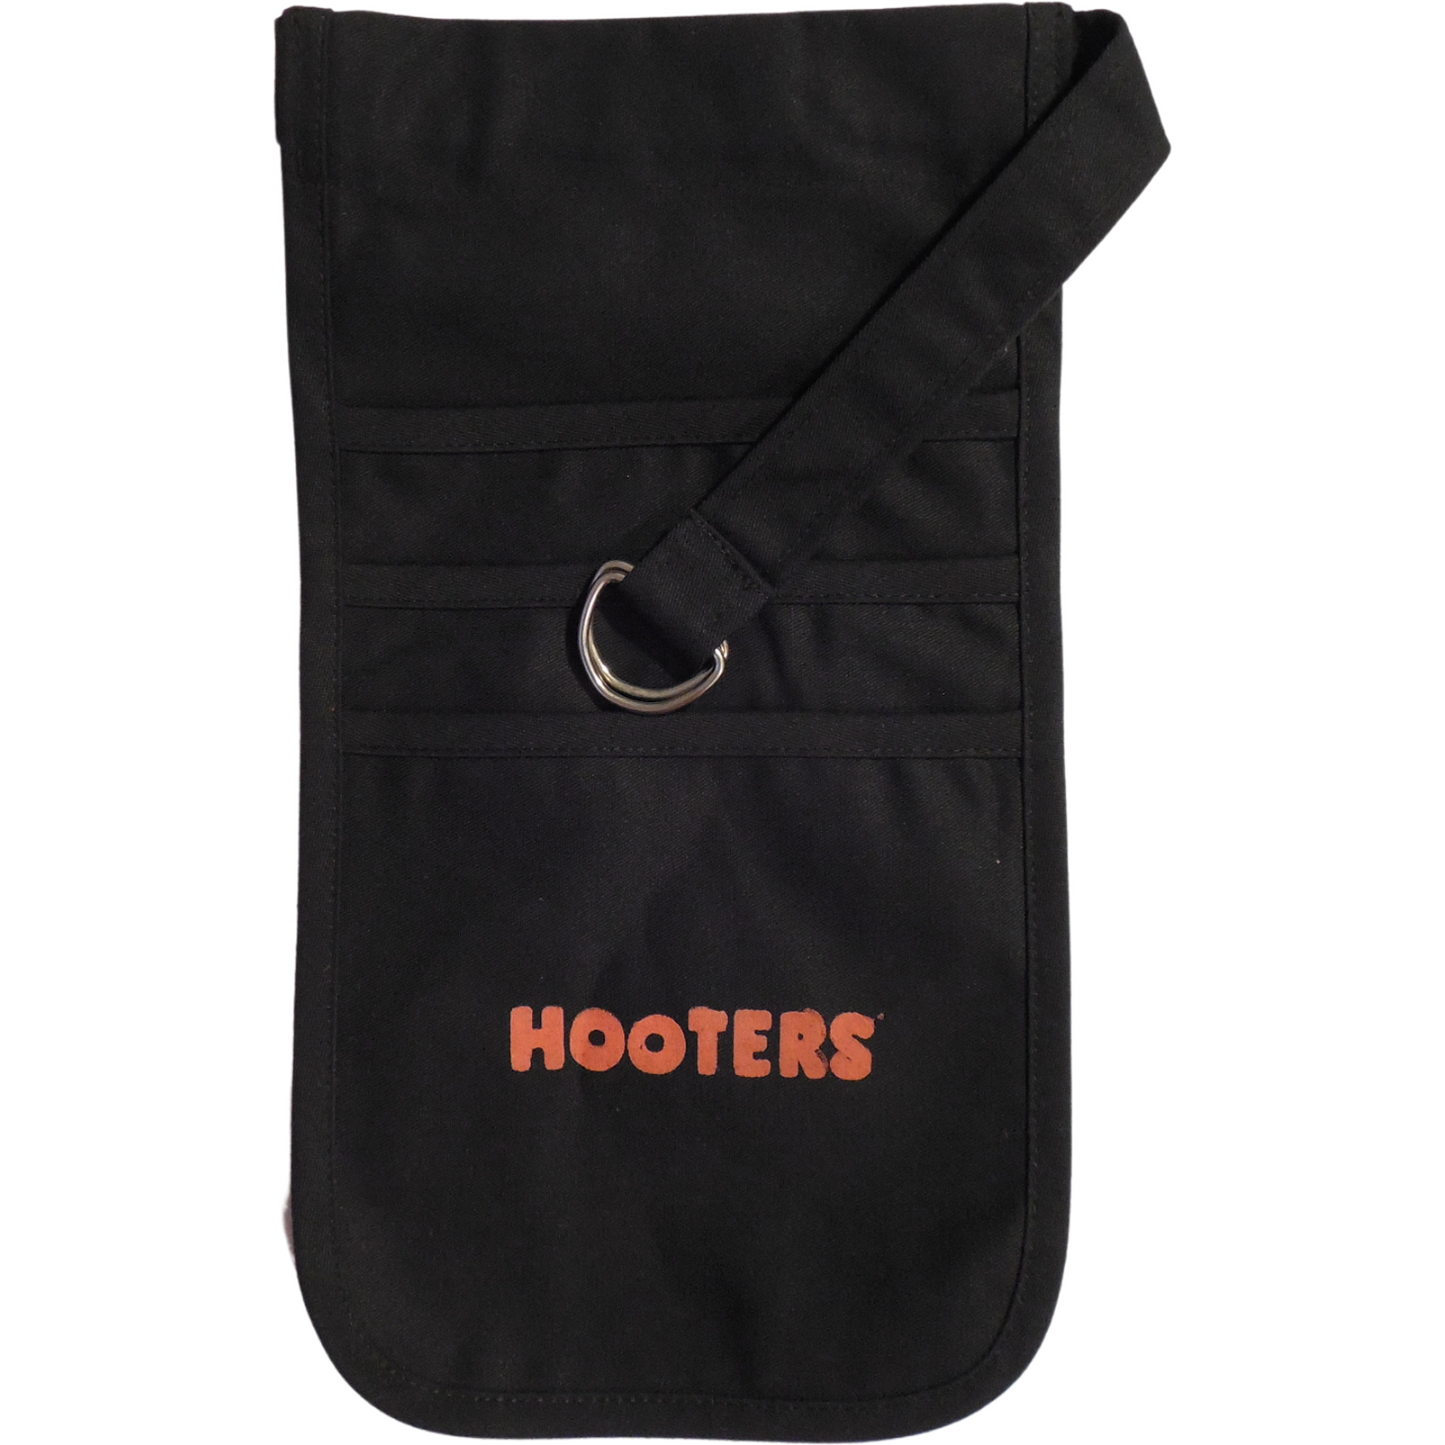 Hooters Women's Costume Black Pouch with Nametag